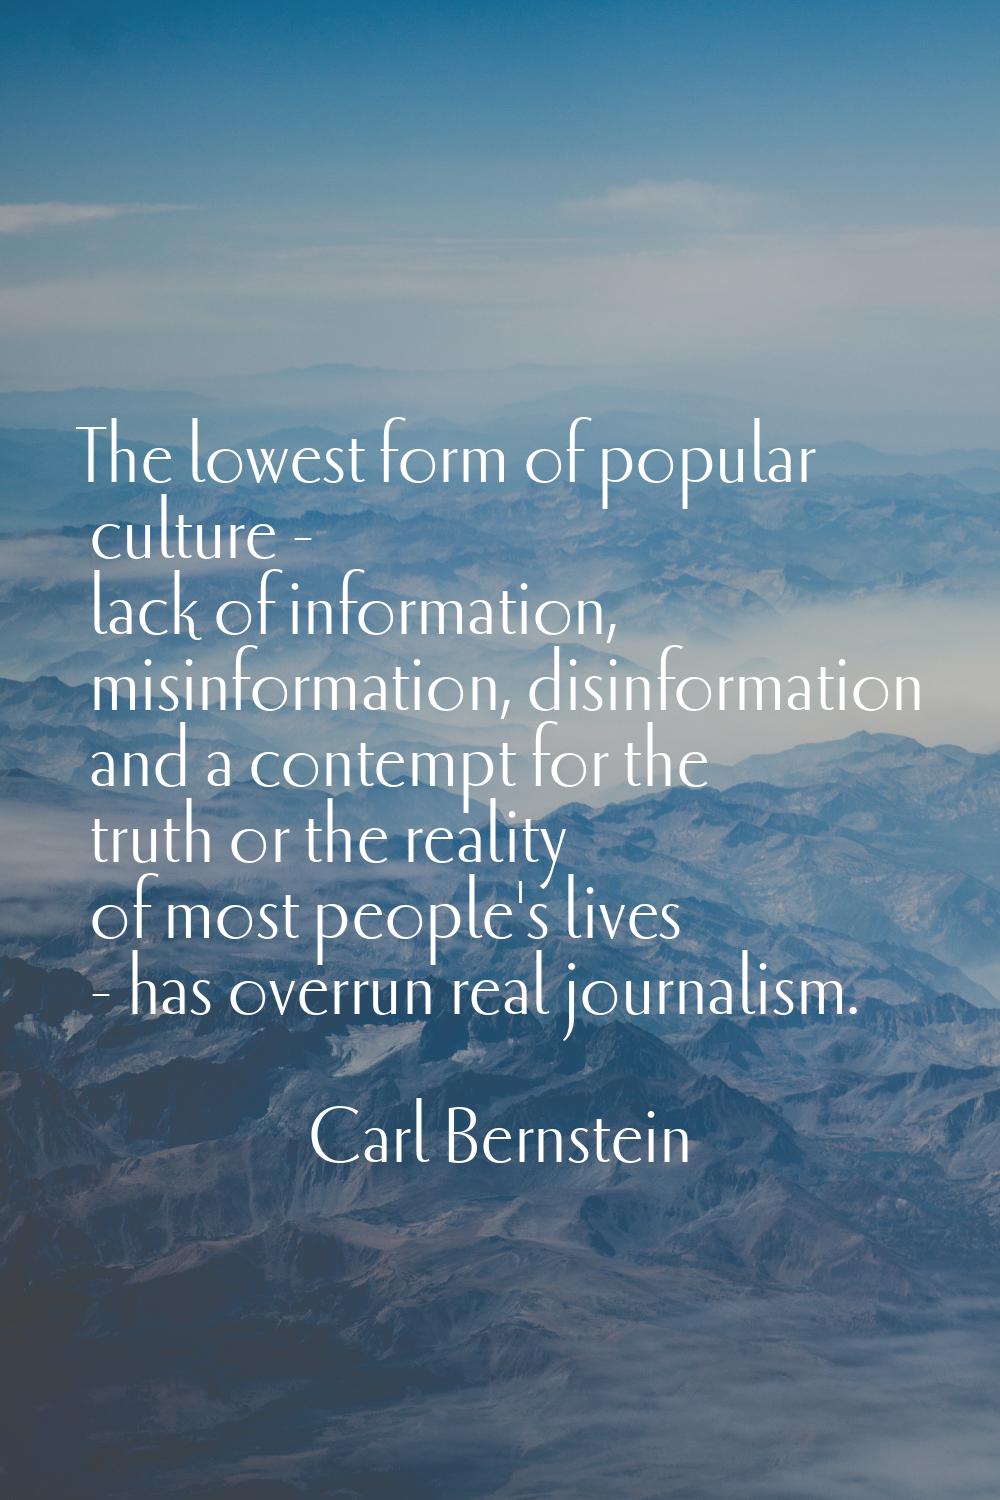 The lowest form of popular culture - lack of information, misinformation, disinformation and a cont